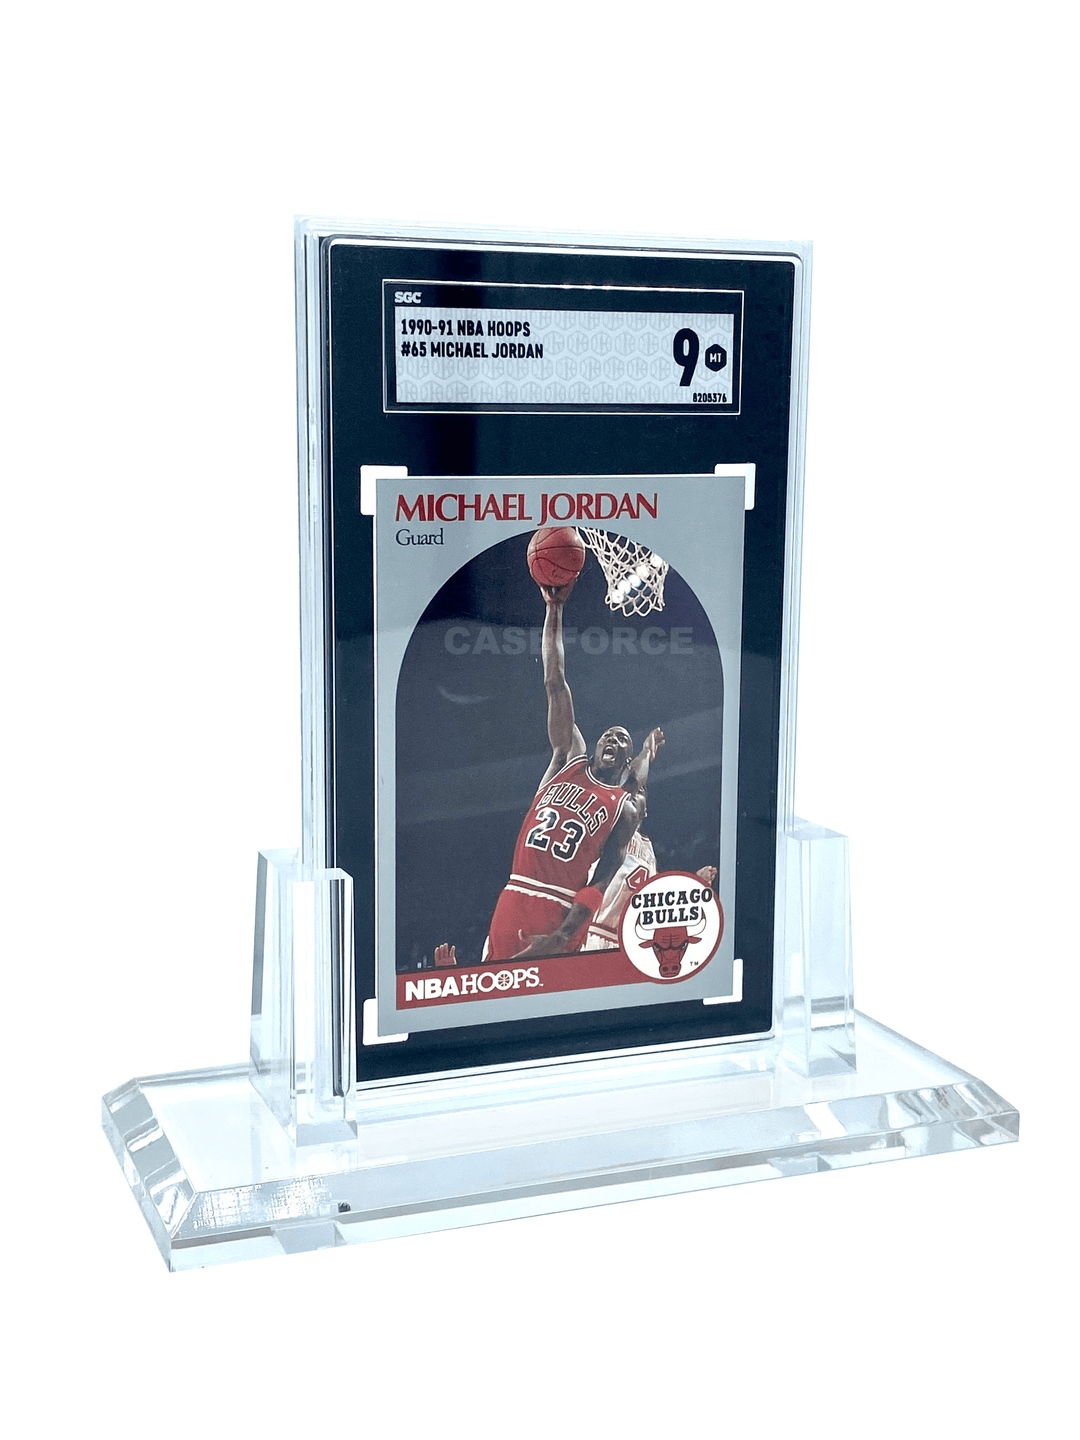 Graded Card Stands & Displays - Caseforceco